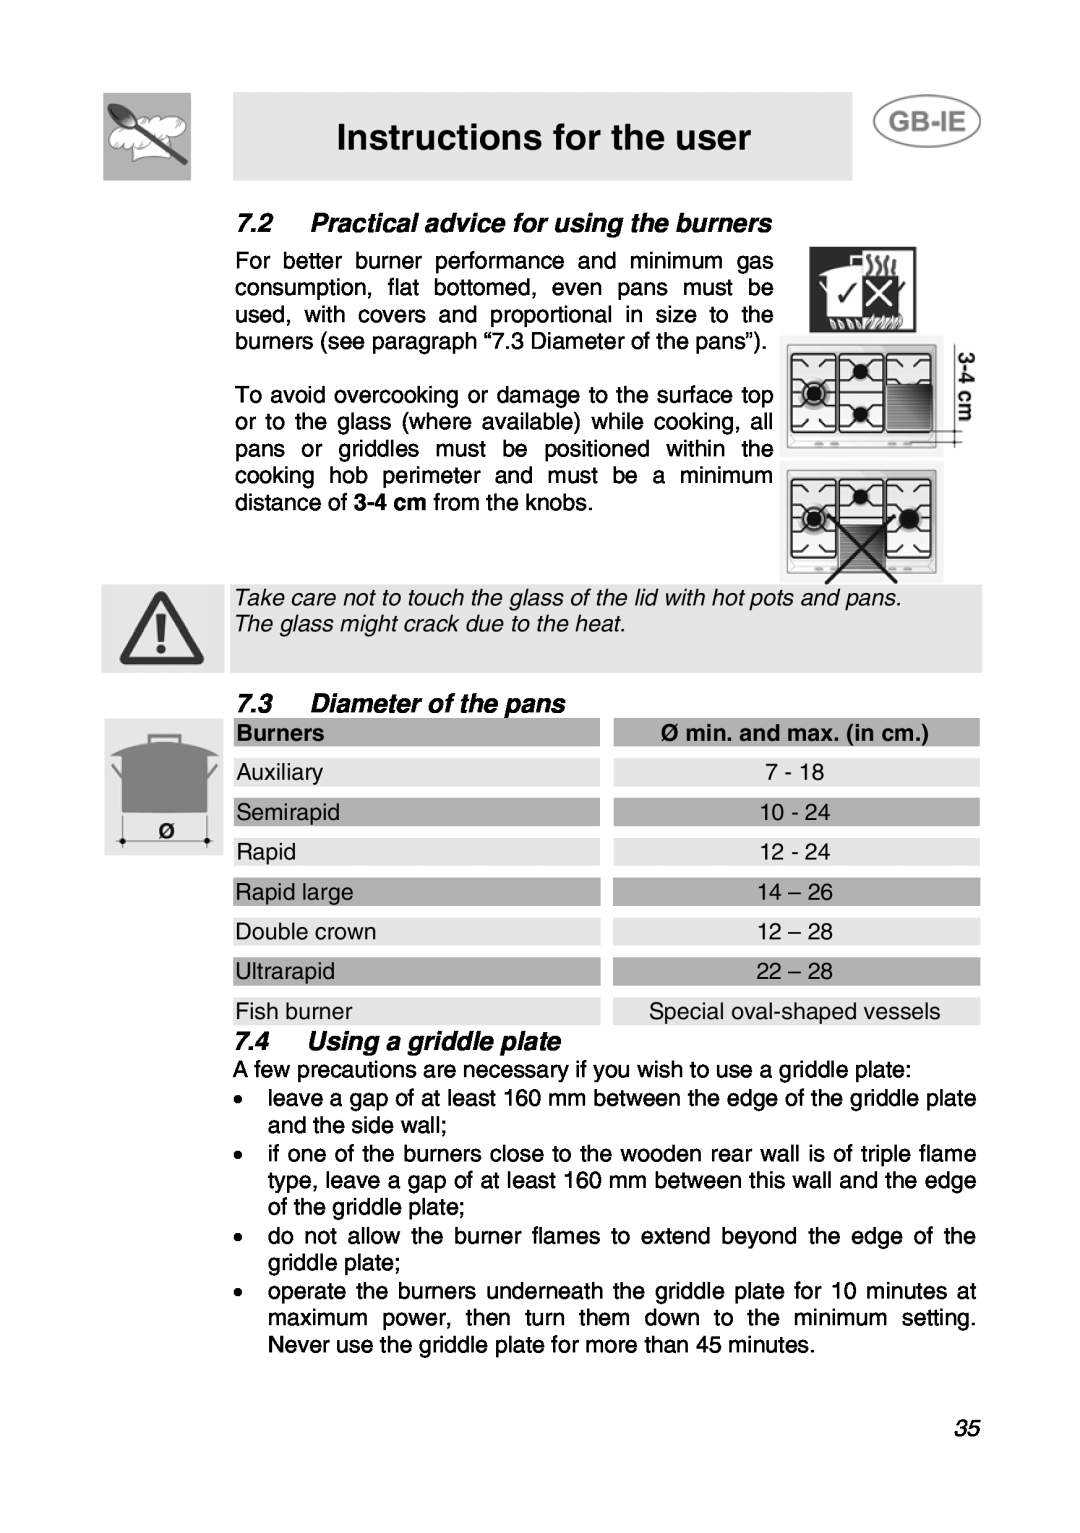 Smeg GCS70XG manual 7.2Practical advice for using the burners, 7.3Diameter of the pans, 7.4Using a griddle plate, Burners 